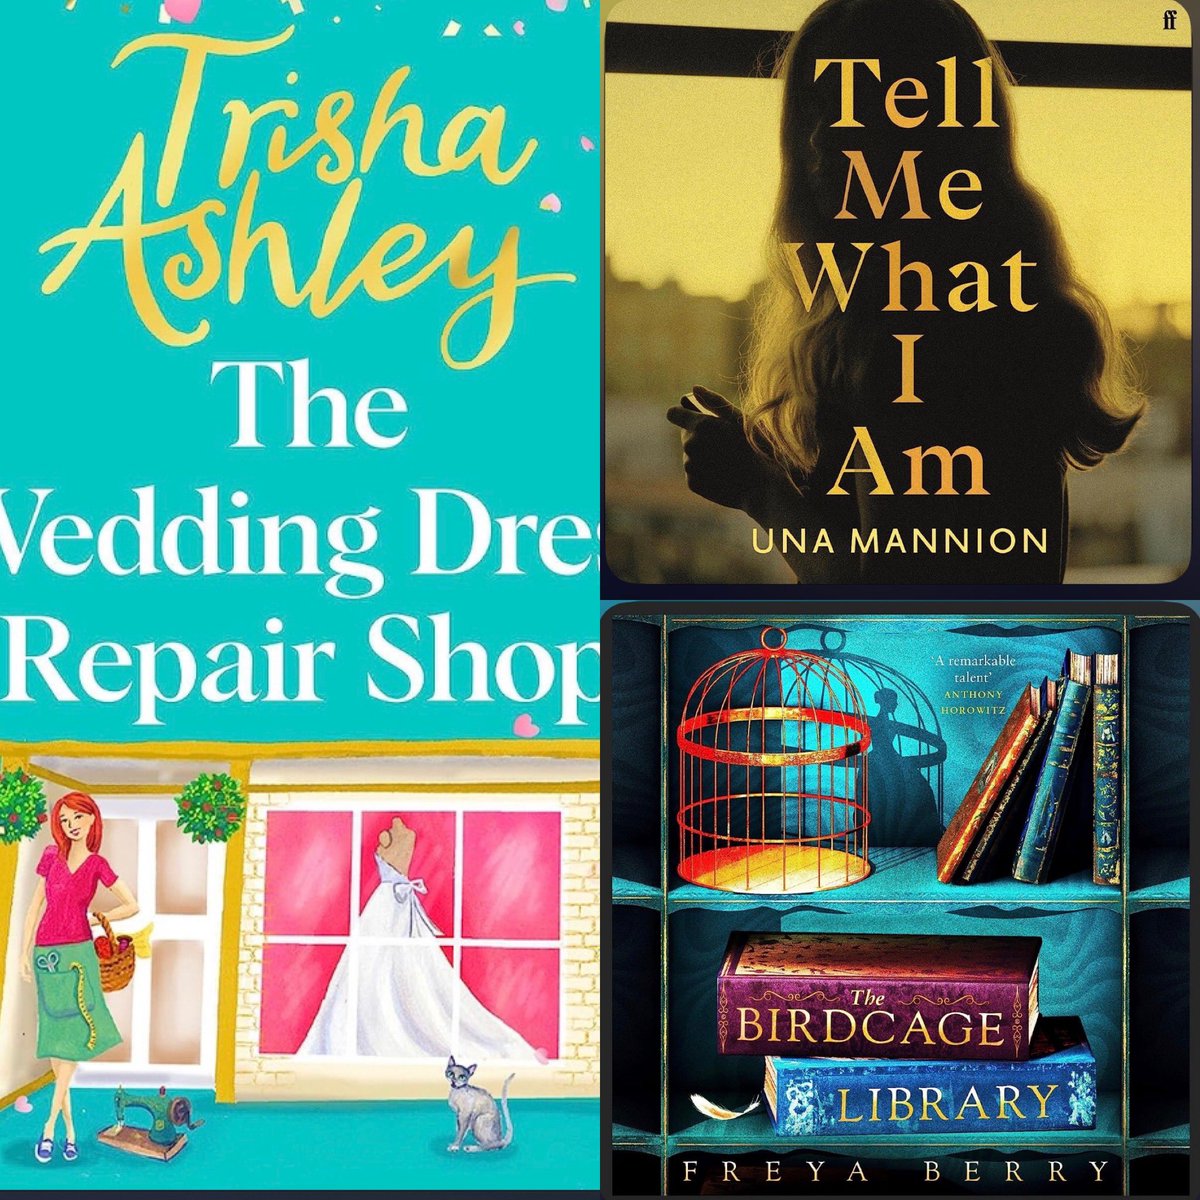 Here are my weekend reads, helping me to survive the heat💖📚🥵
#TheWeddingDressRepairShop by @trishaashley 
#TheBirdcageLibrary @FreyaBBooks 
#TellMeWhatIAm @una_m_mannion 
Each of these books is individually incredible 😄📚💖👍⬇️⬇️